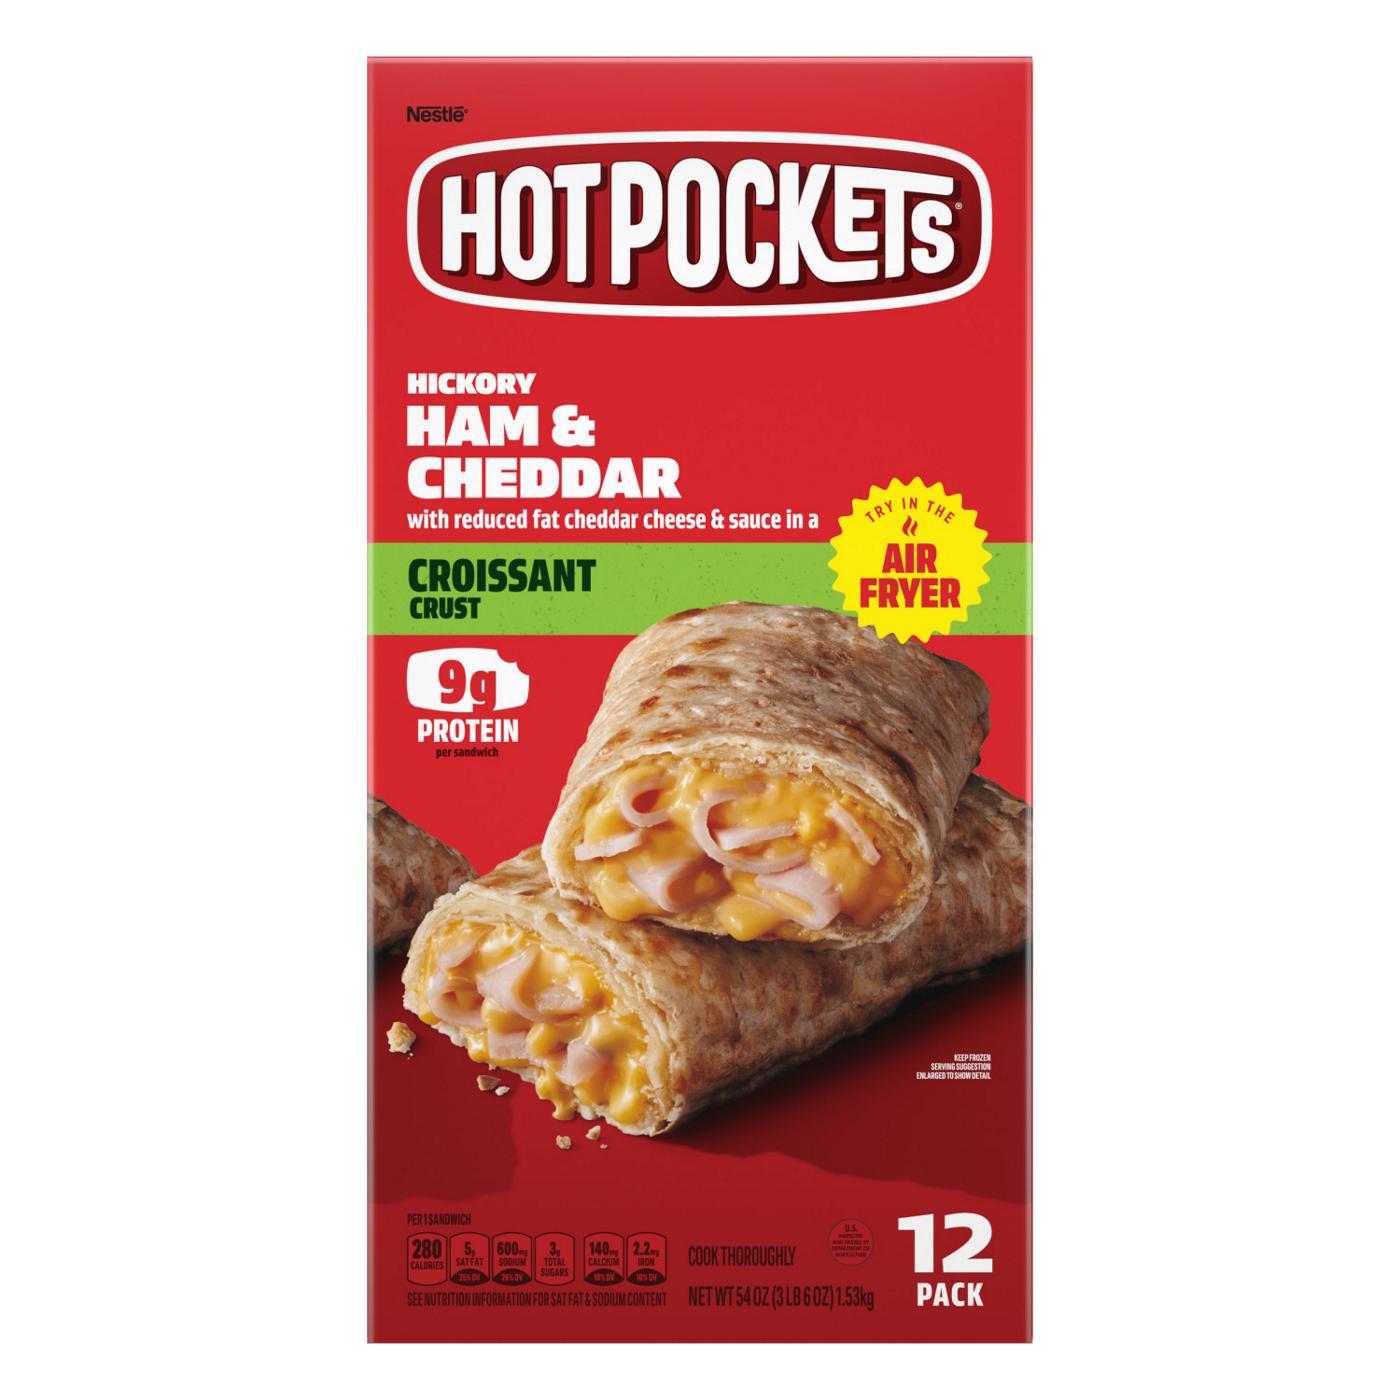 Hot Pockets Hickory Ham & Cheddar Frozen Sandwiches - Croissant Crust; image 1 of 4